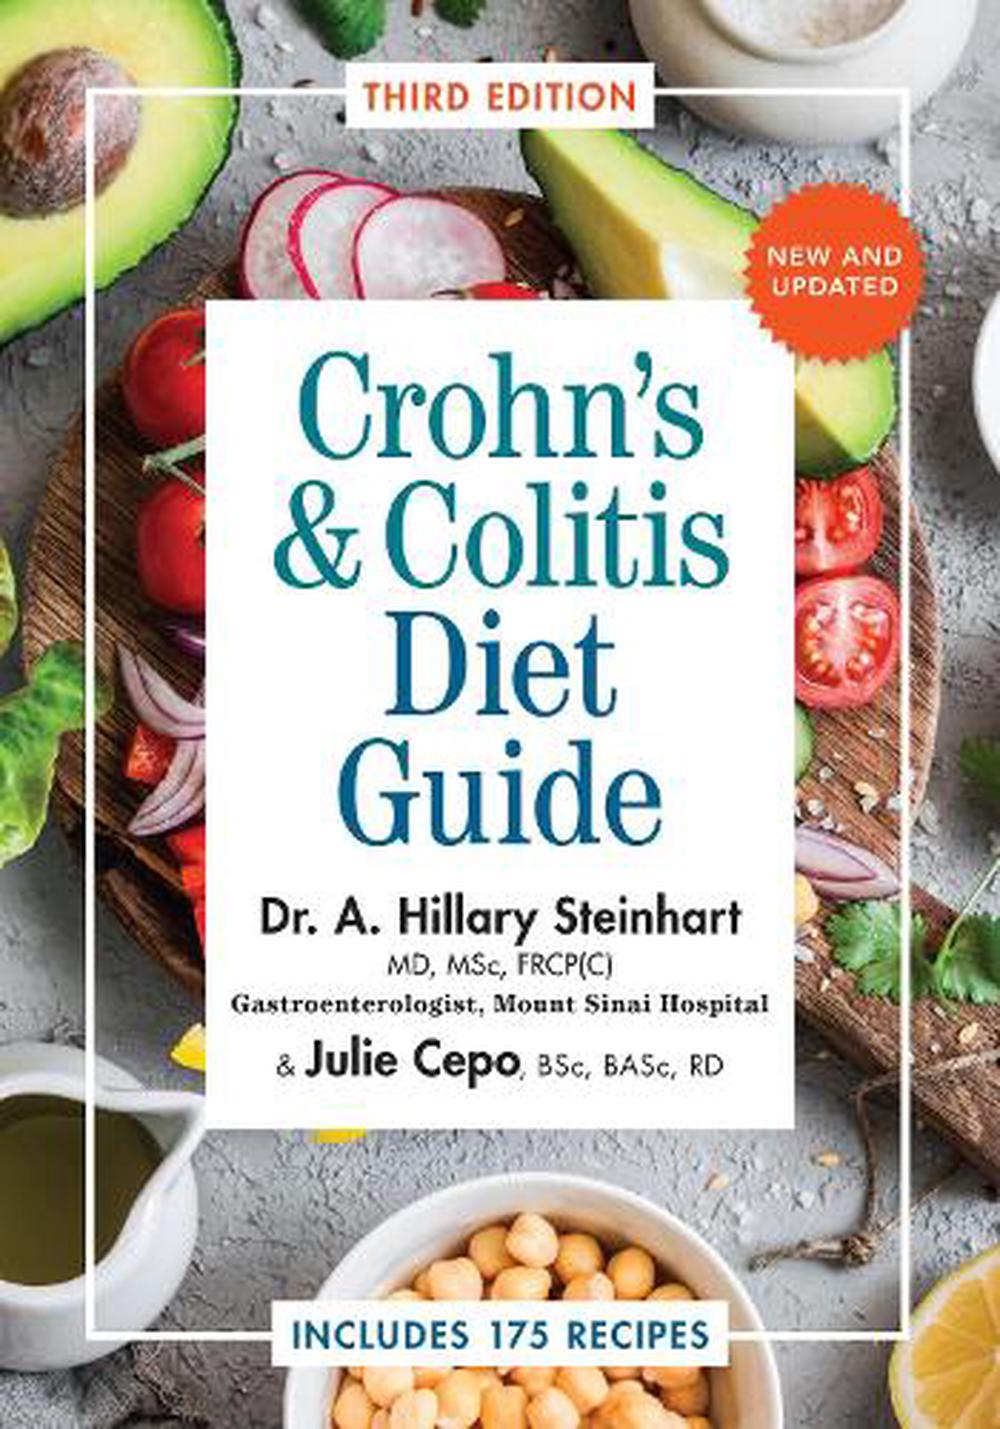 Crohn's & Colitis Diet Guide: Includes 175 Recipes by Julie Cepo